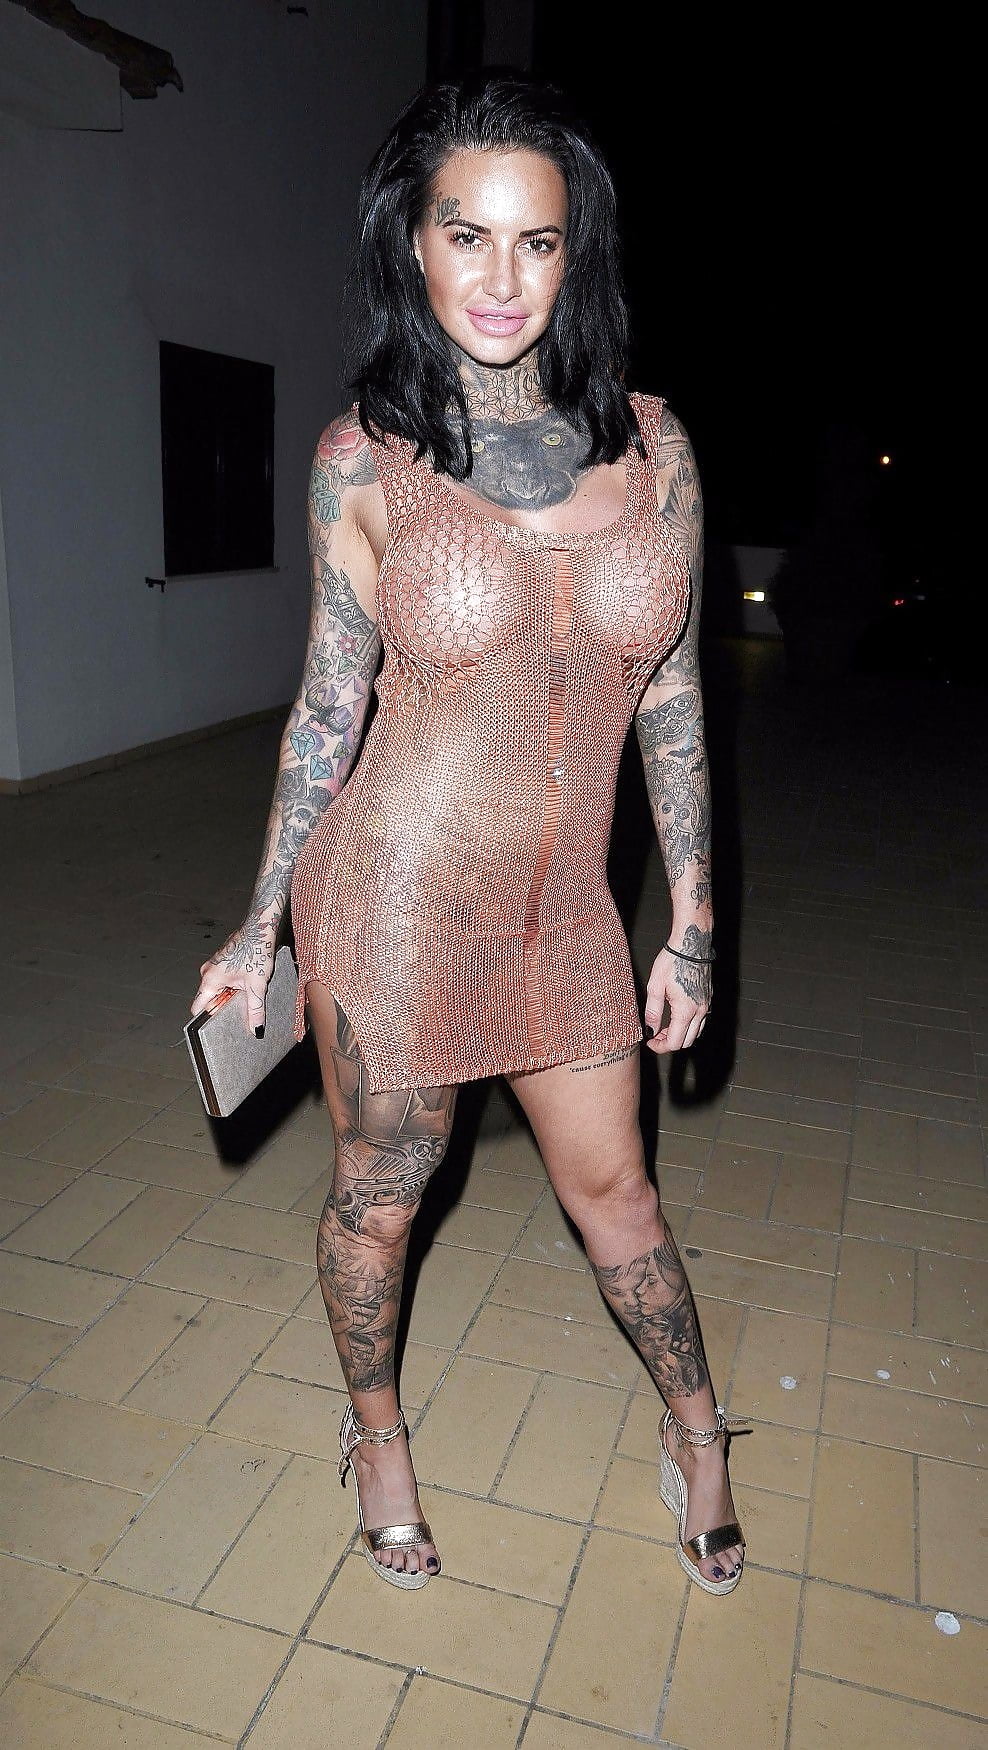 Jemma lucy looking hot in see thru dress  (1/14)